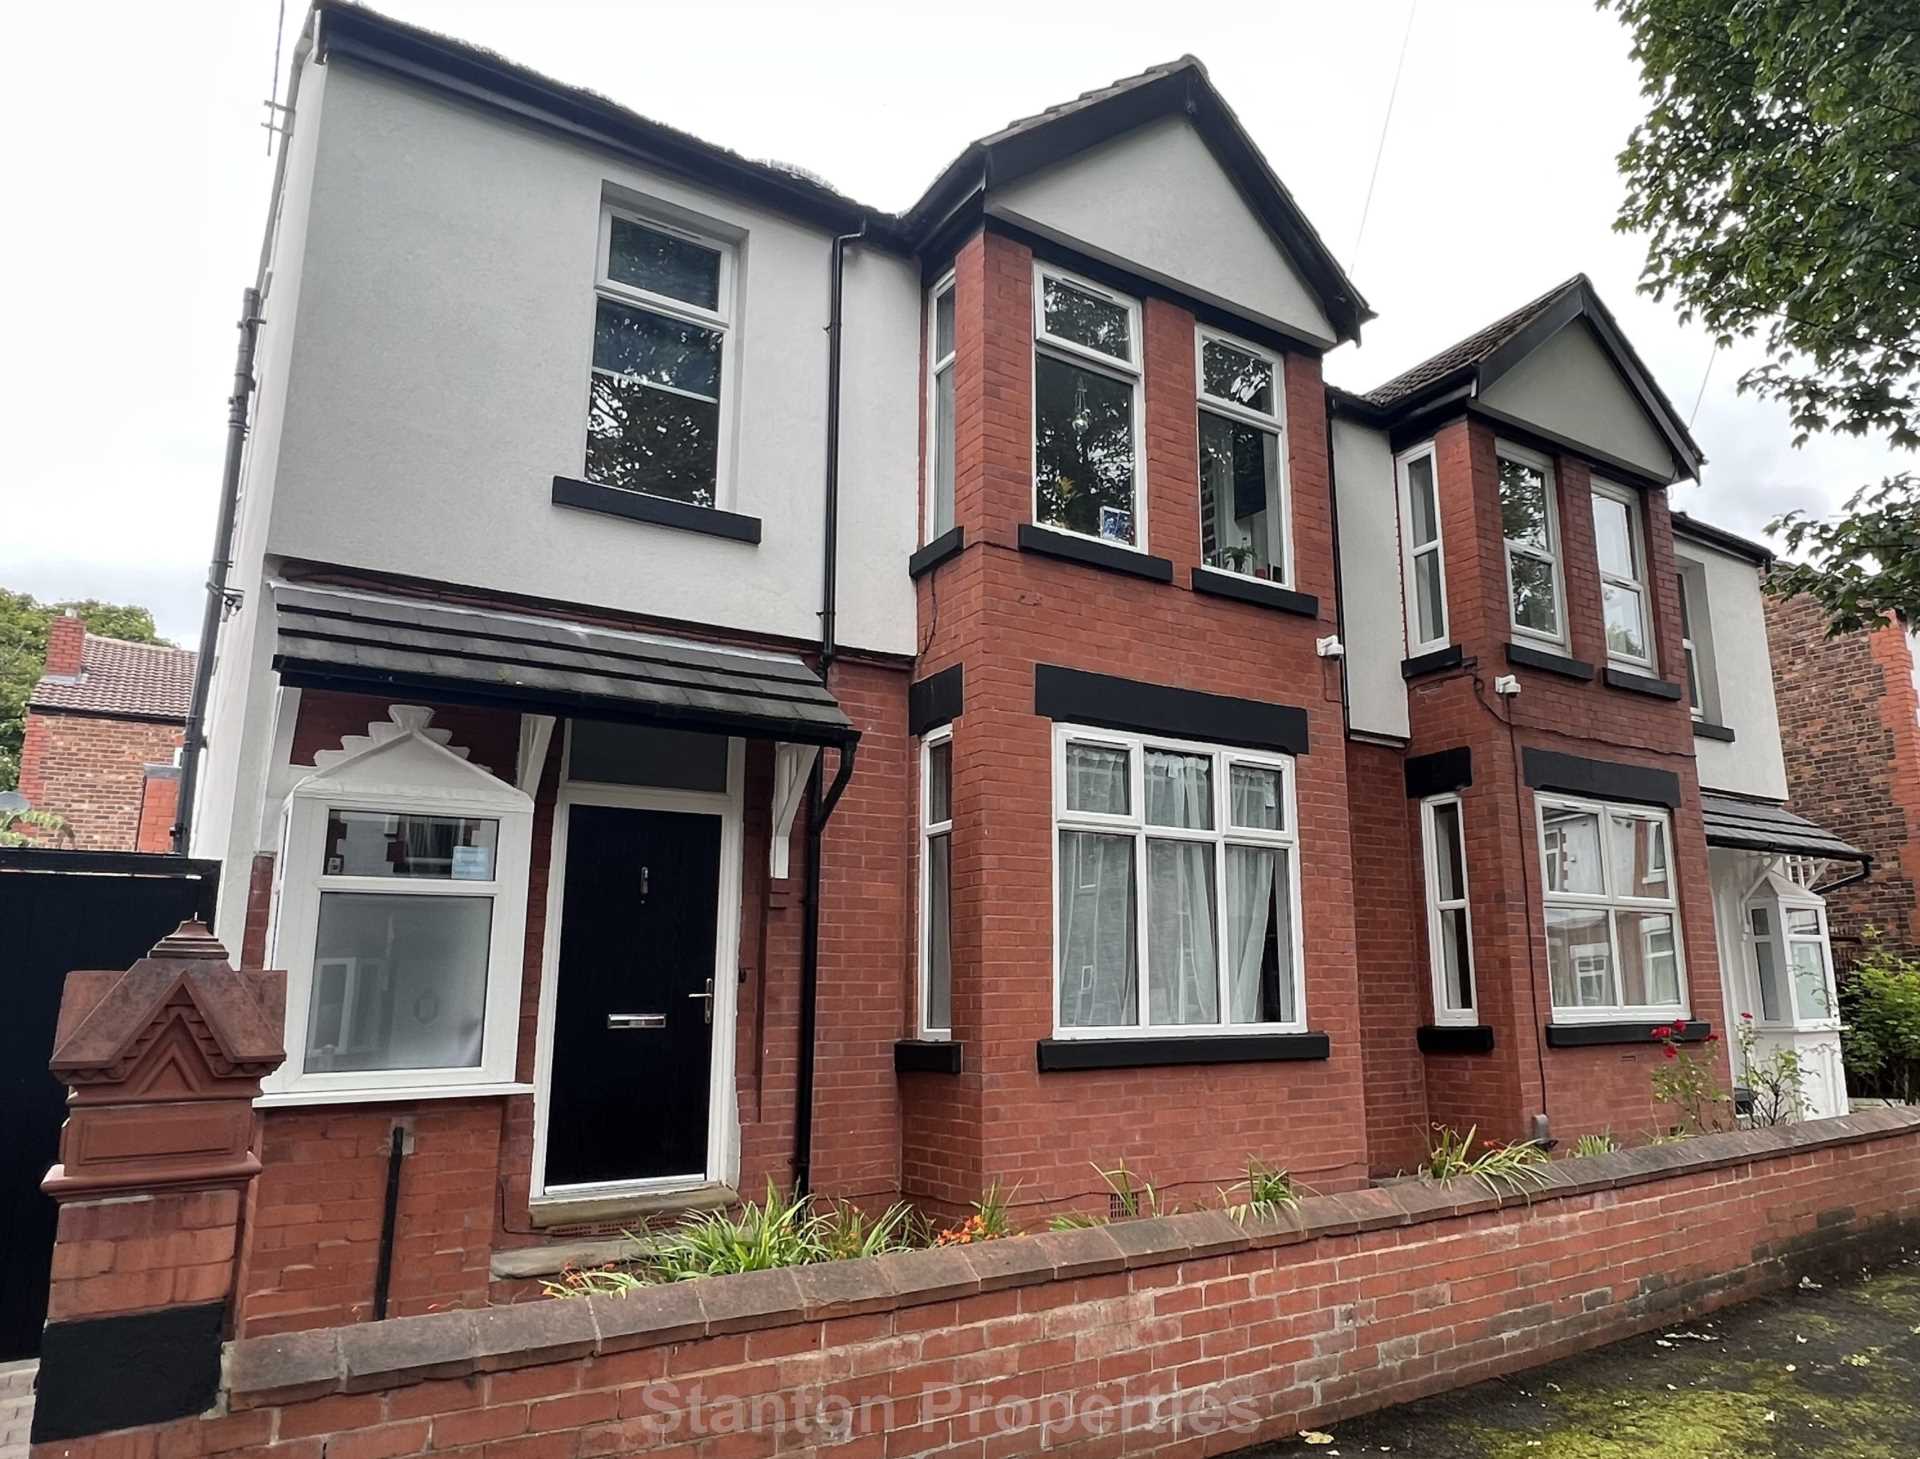 £145 pppw, Linden Grove, Fallowfield, Image 1